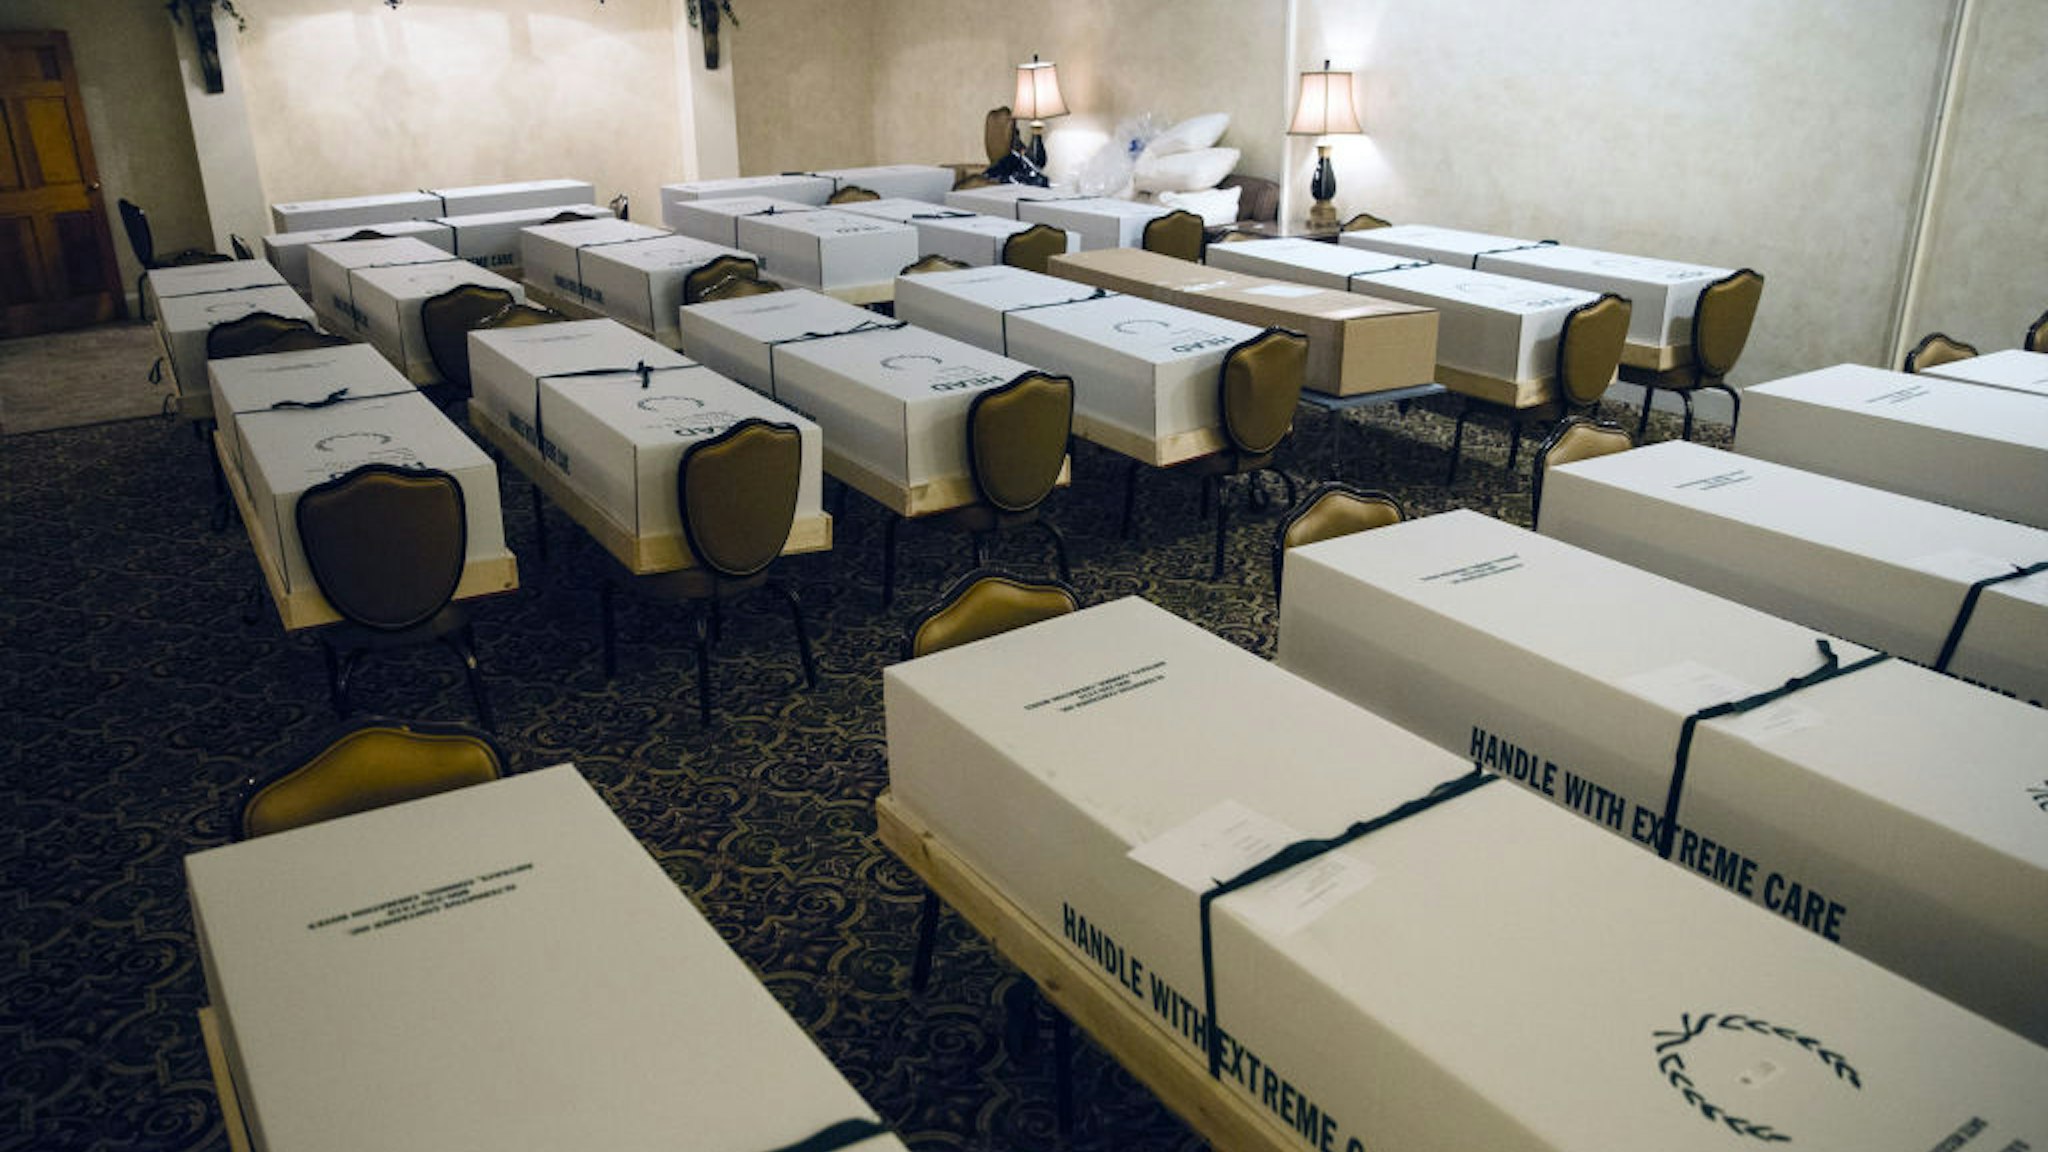 Cremation boxes, mostly containing the bodies of suspected covid-19 patients, sit in a room at a funeral home in the Queens borough of New York, U.S., on Wednesday, April 29, 2020.